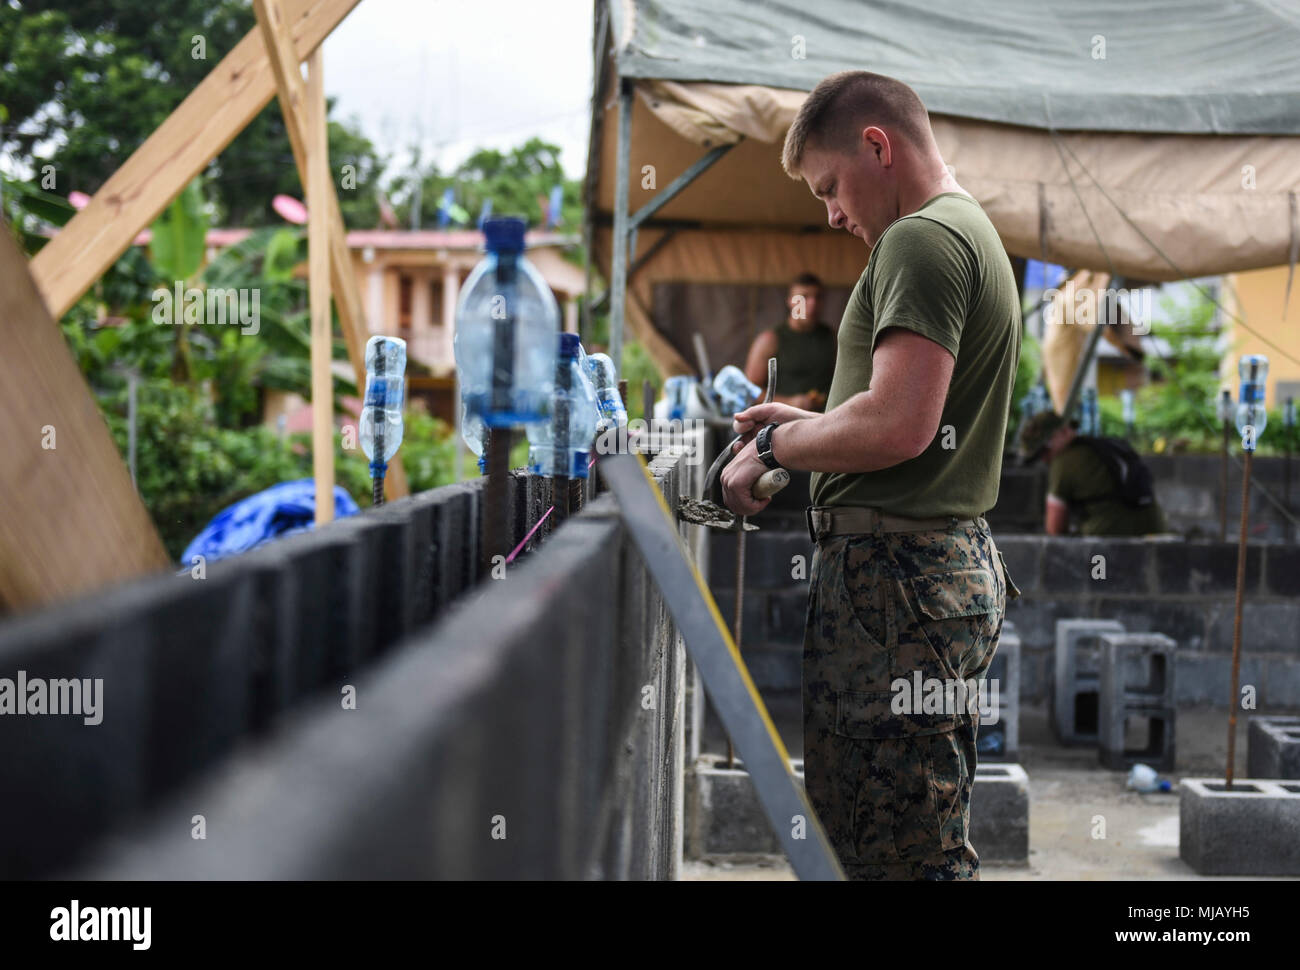 U.S. Marine Corps Reserve Lance Cpl. Darrin Gingerich, 346th Air Expeditionary Group combat engineer who is deployed from Peoria, Ill, uses concrete to fill gaps April 27, 2018 at a construction site in Meteti, Panama. Gingerich is participating in Exercise New Horizons 2018, which will assist communities throughout Panama by providing medical assistance and building facilities such as schools, a youth community center and a women’s health ward. (U.S. Air Force photo by Senior Airman Dustin Mullen/Released) Stock Photo